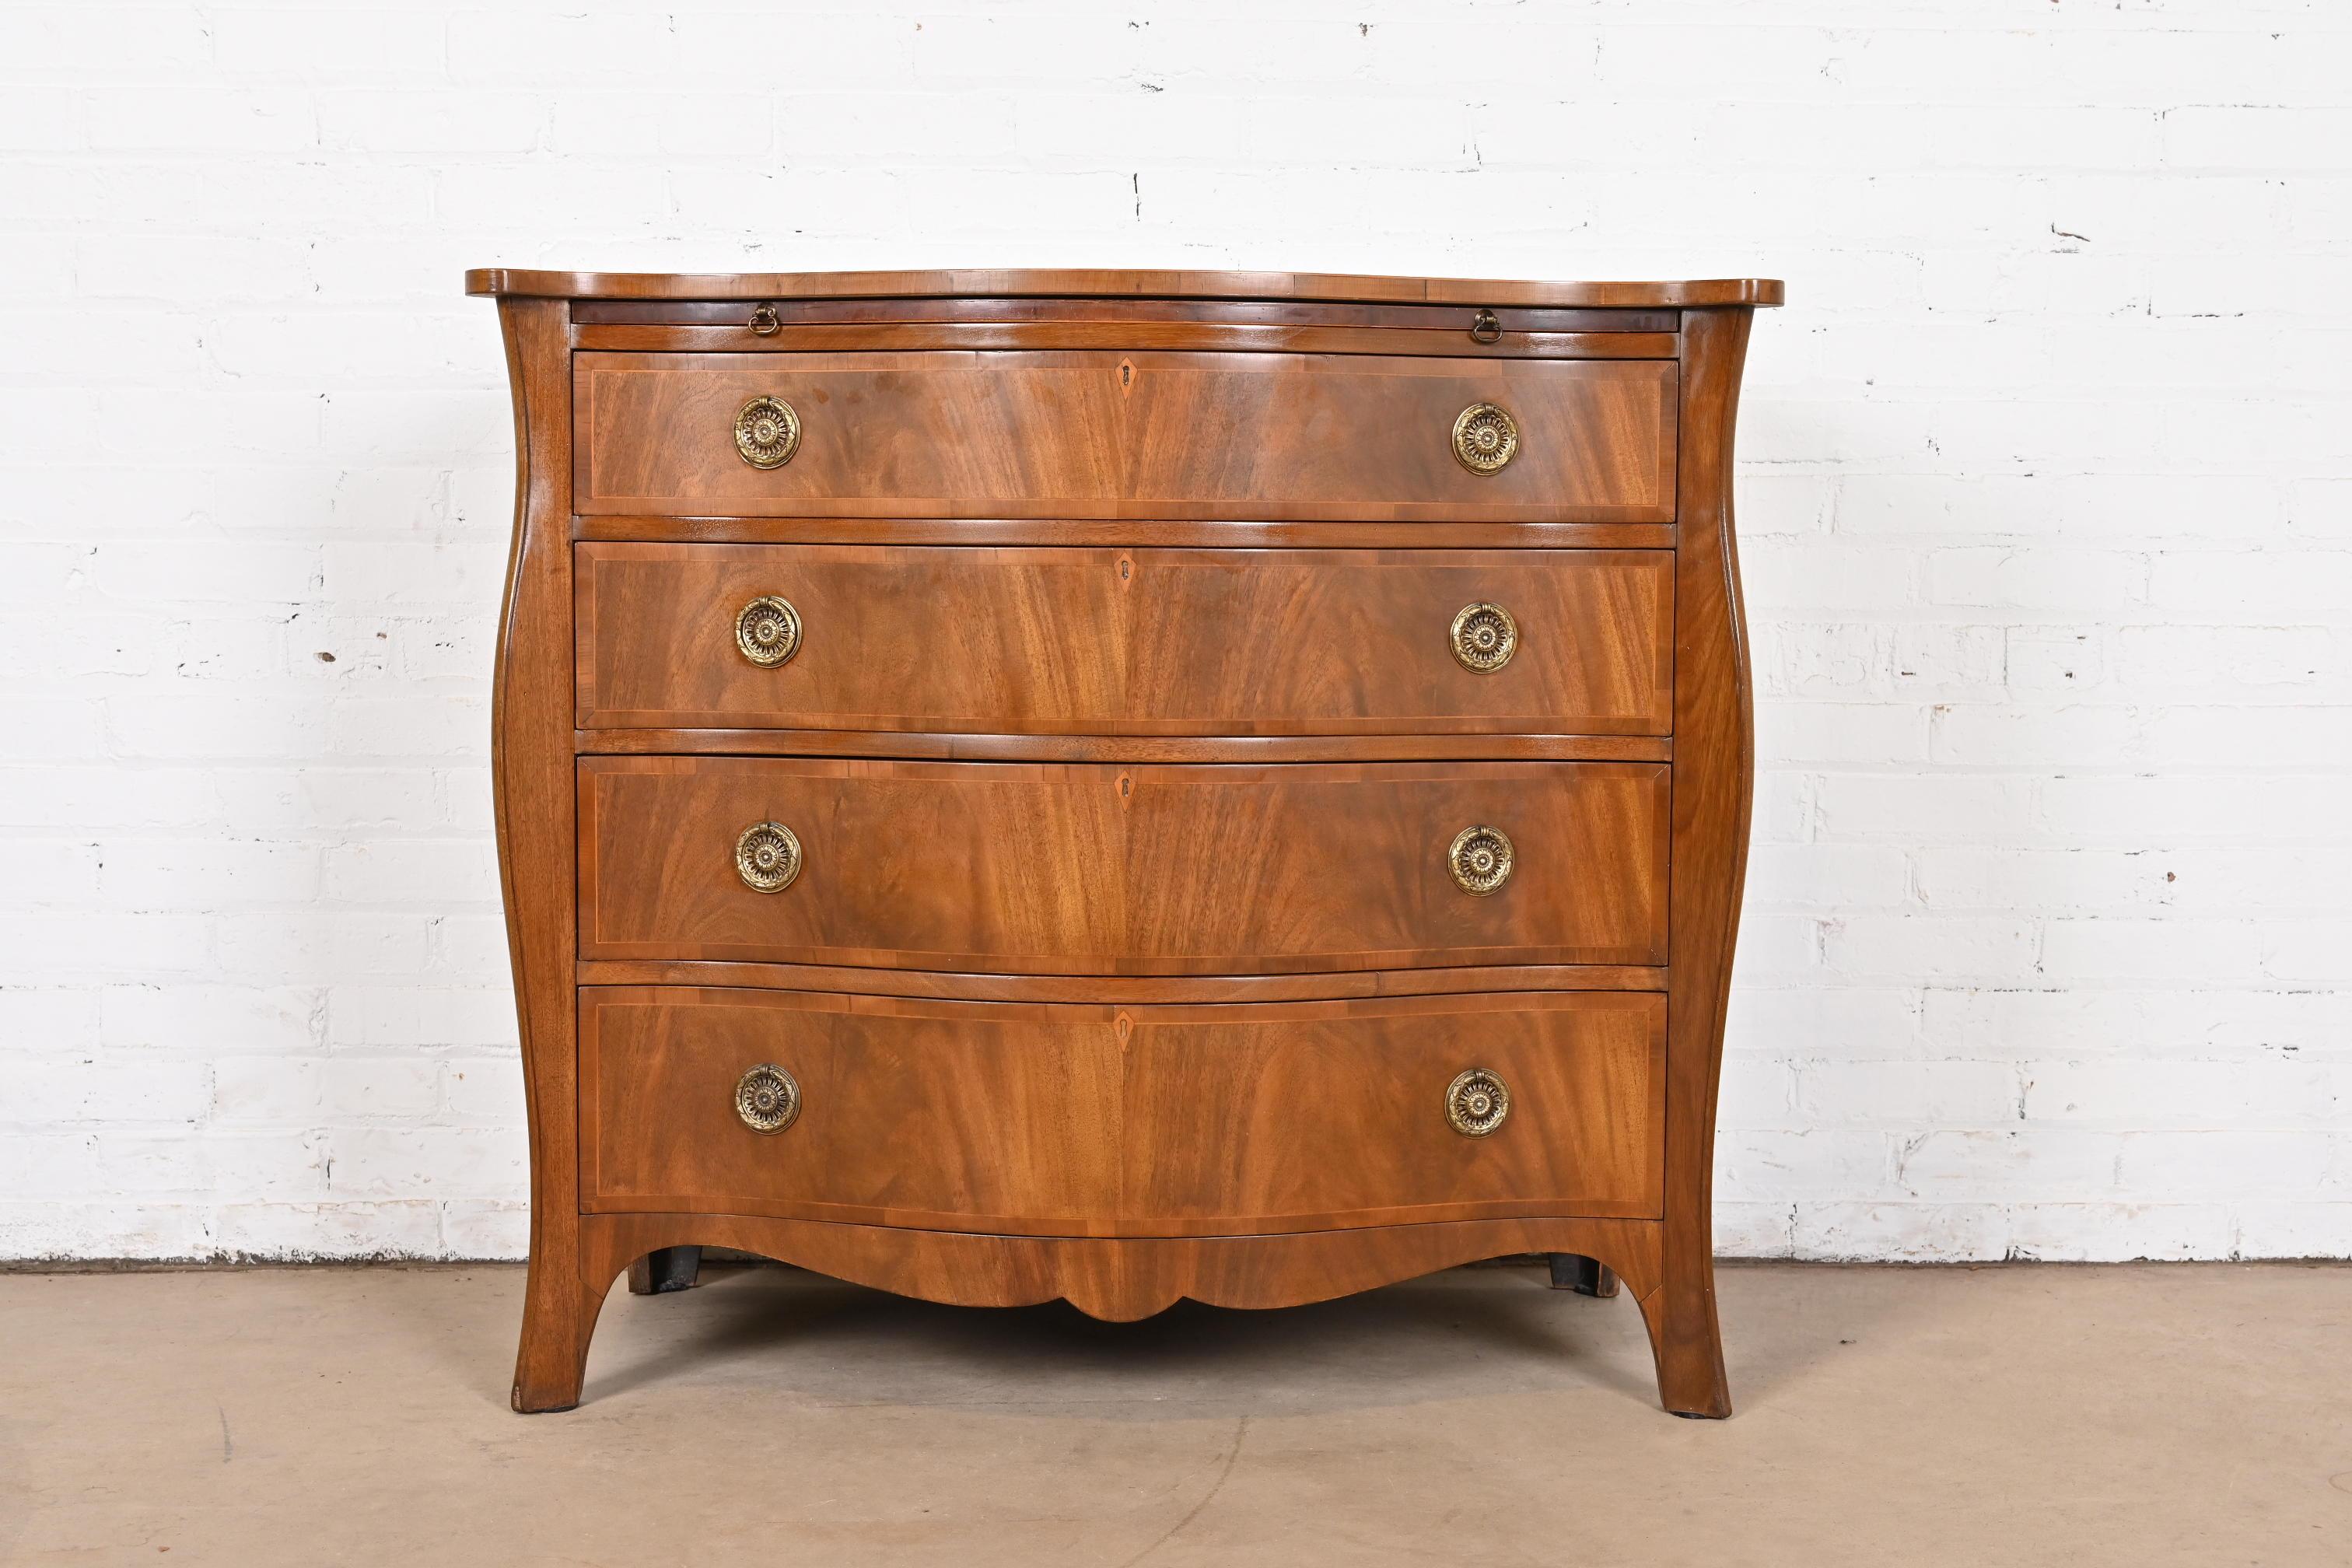 An exceptional Georgian or Regency style flame mahogany dresser or chest of drawers

By Baker Furniture

USA, Circa 1940s

Beautiful book-matched flame mahogany, with embossed leather pull-out writing or dressing table, and original brass